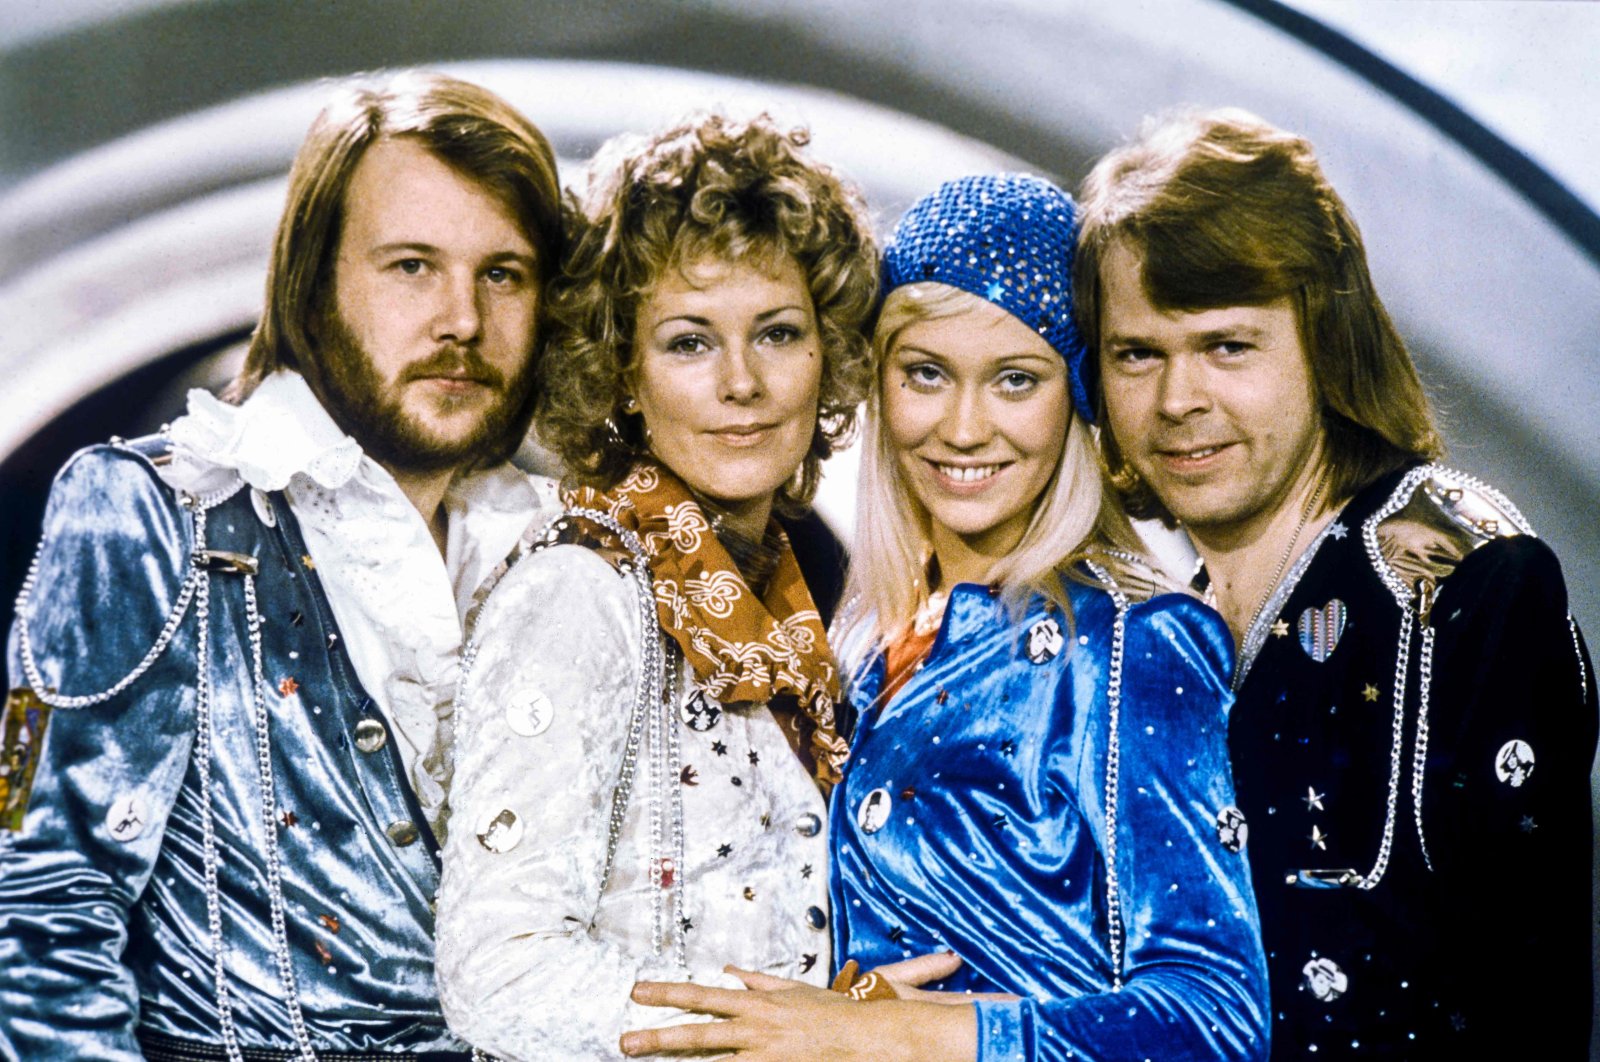 Pop group ABBA members Benny Andersson (L), Anni-Frid Lyngstad (C-L), Agnetha Faltskog (C-R) and Bjorn Ulvaeus pose after winning the Swedish branch of the Eurovision Song Contest with their song "Waterloo," in Stockhold, Sweden, Feb. 9, 1974. (AFP Photo)